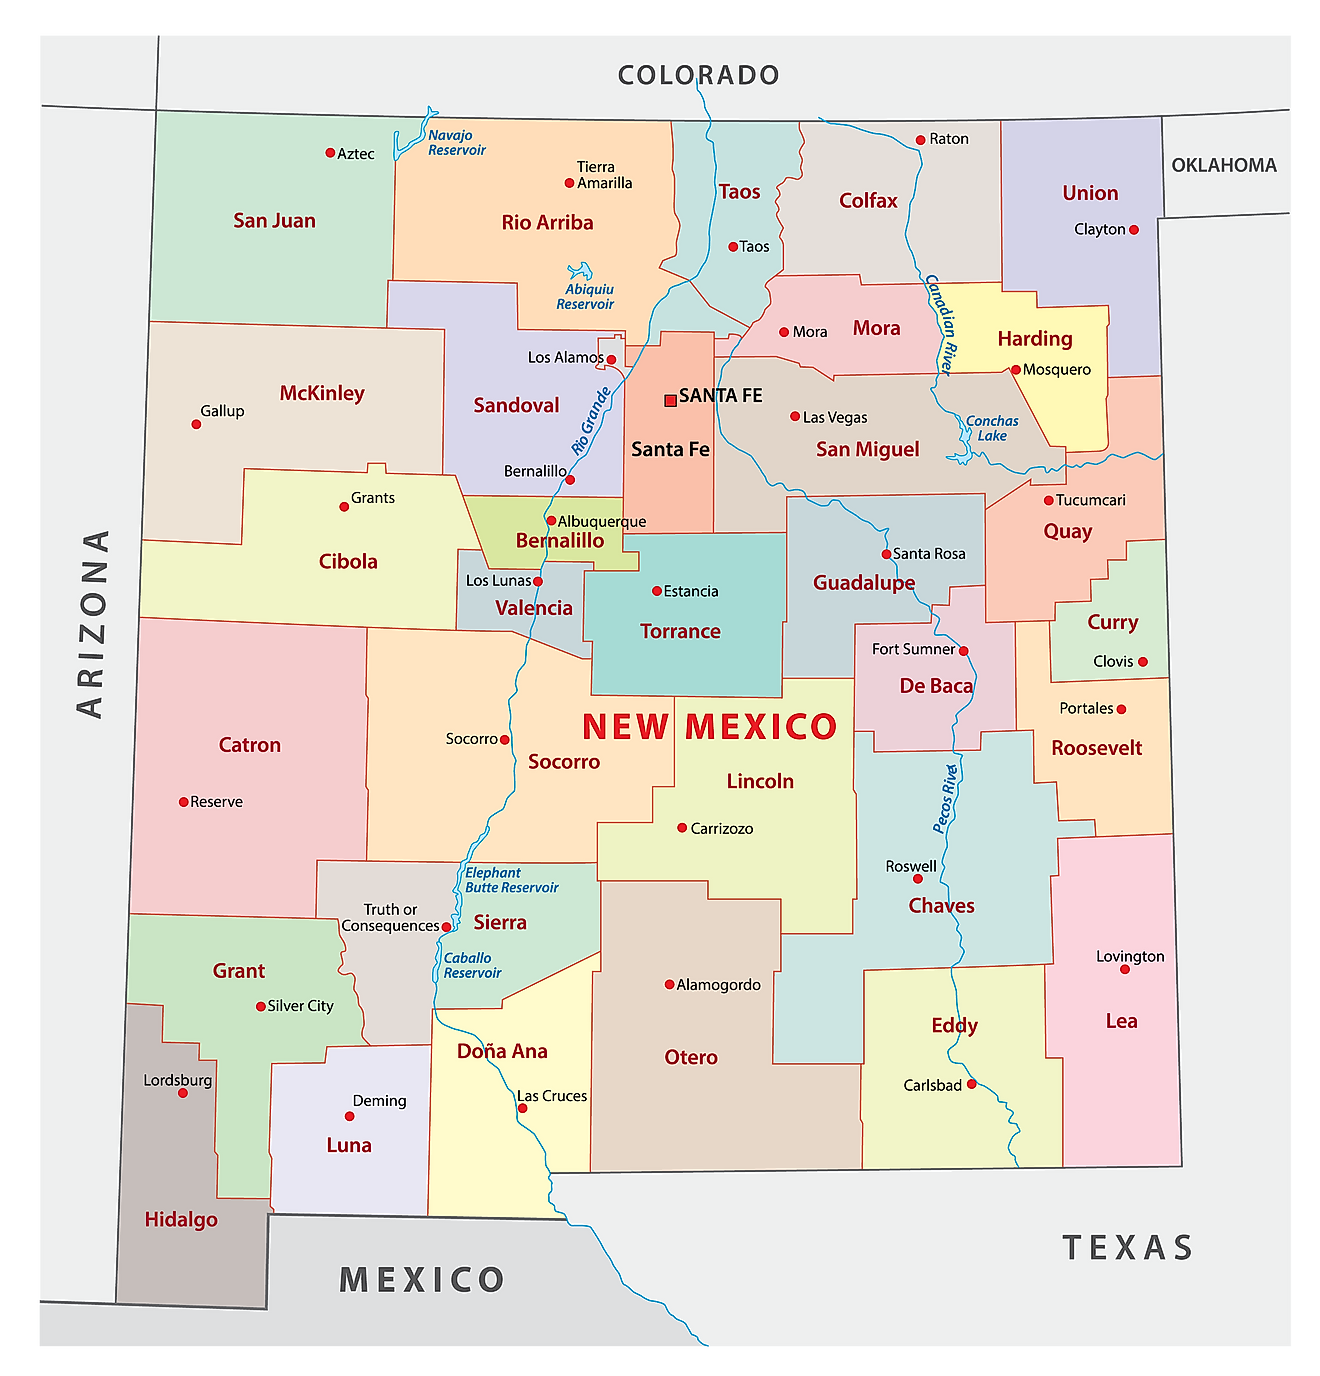 Administrative Map of New Mexico showing its 33 counties and the capital city - Santa Fe